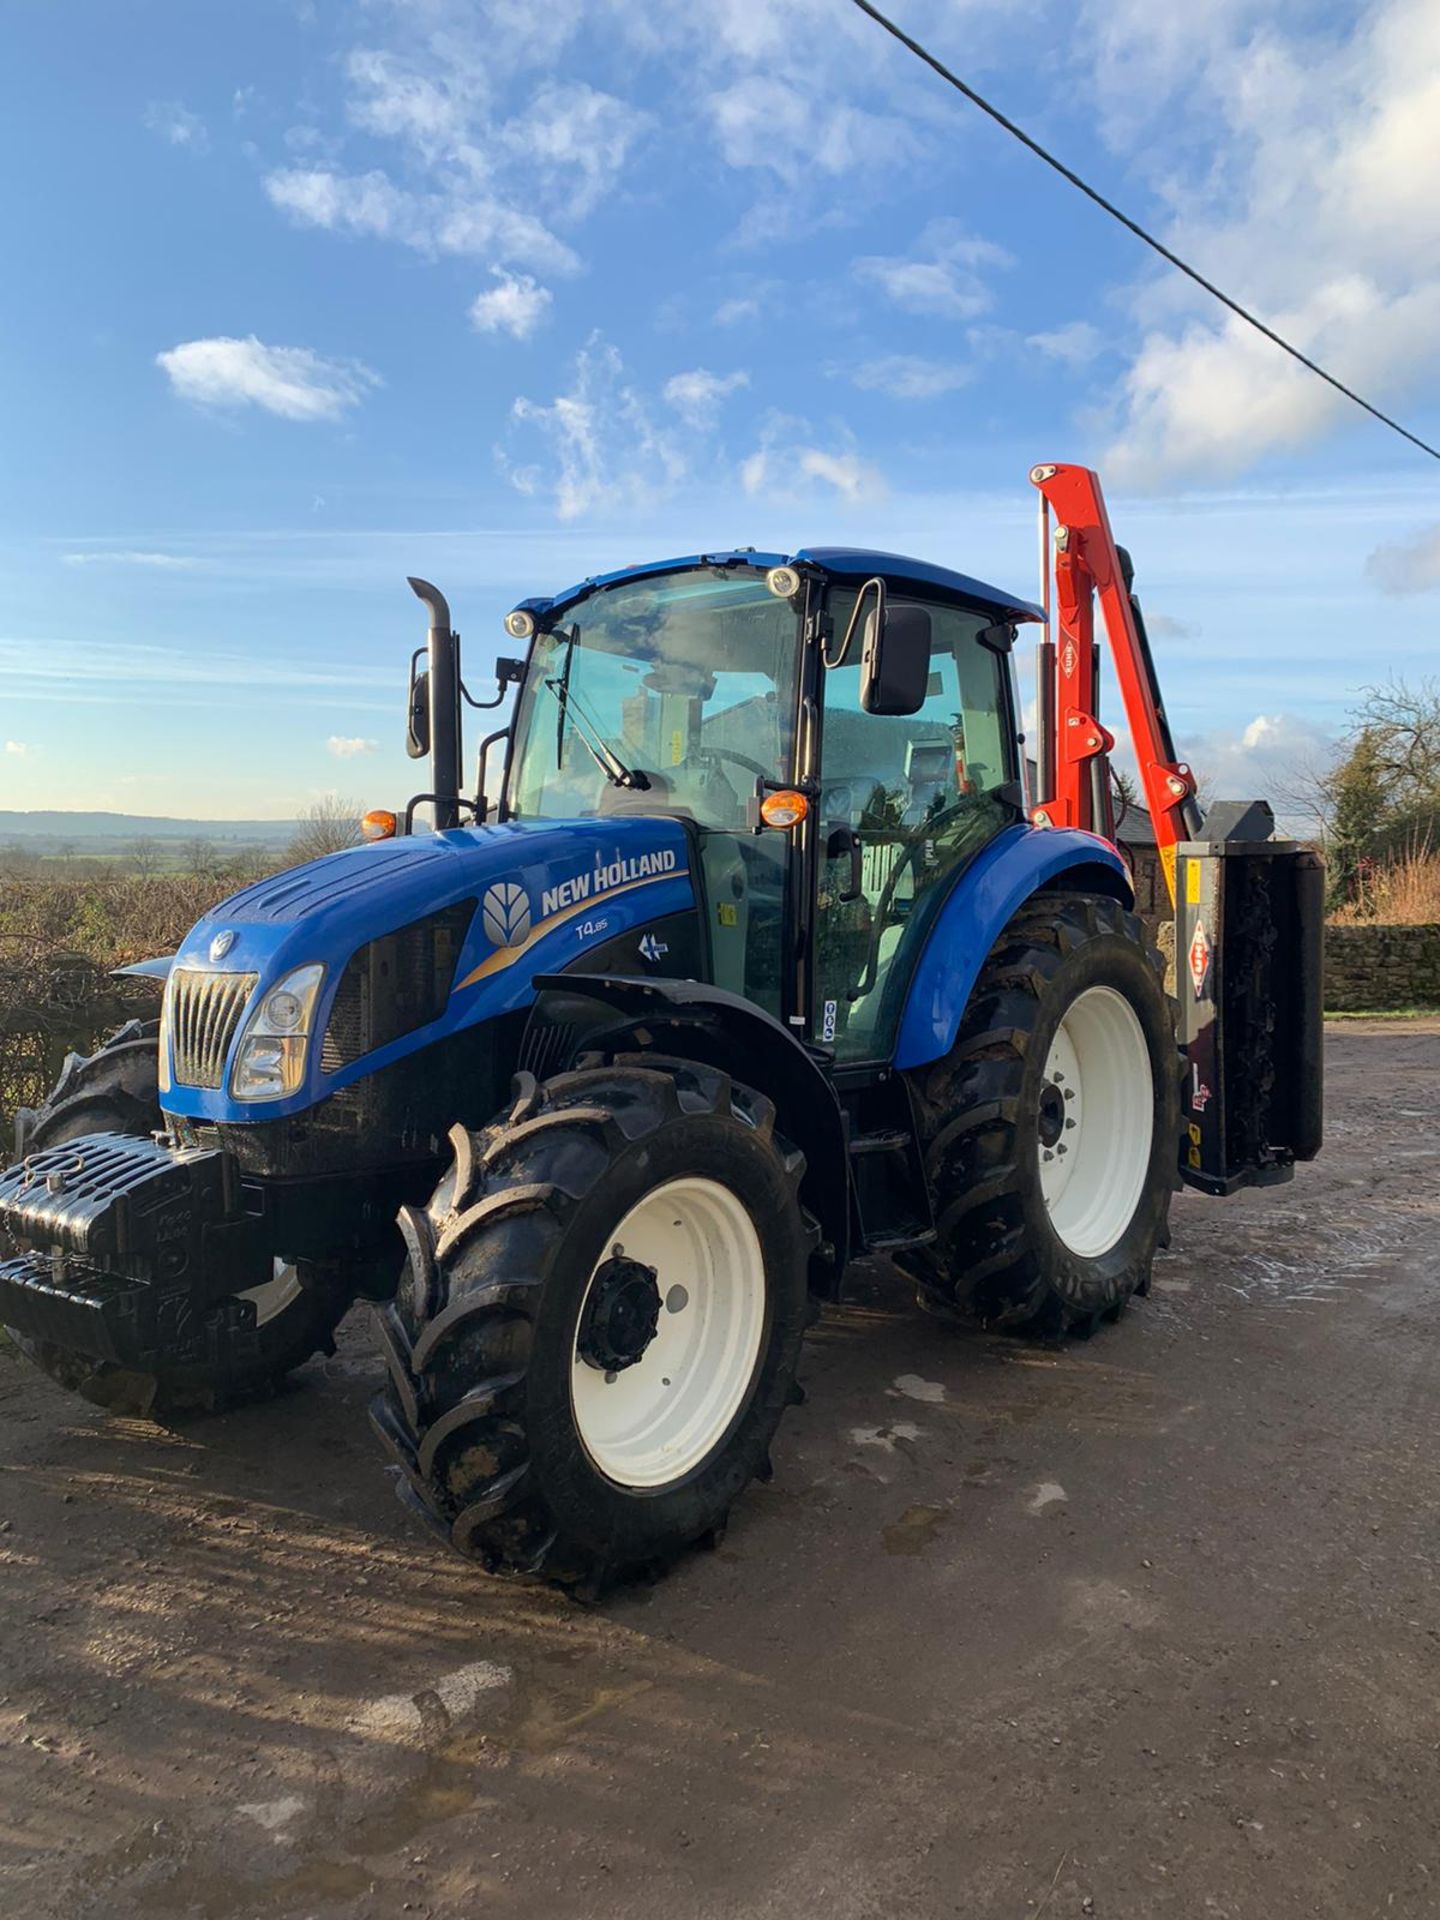 2017/67 REG NEW HOLLAND T4.85 4WD DIESEL TRACTOR, FULL GLASS CAB, HEDGECUTTER SOLD SEPERATELY - Image 4 of 20